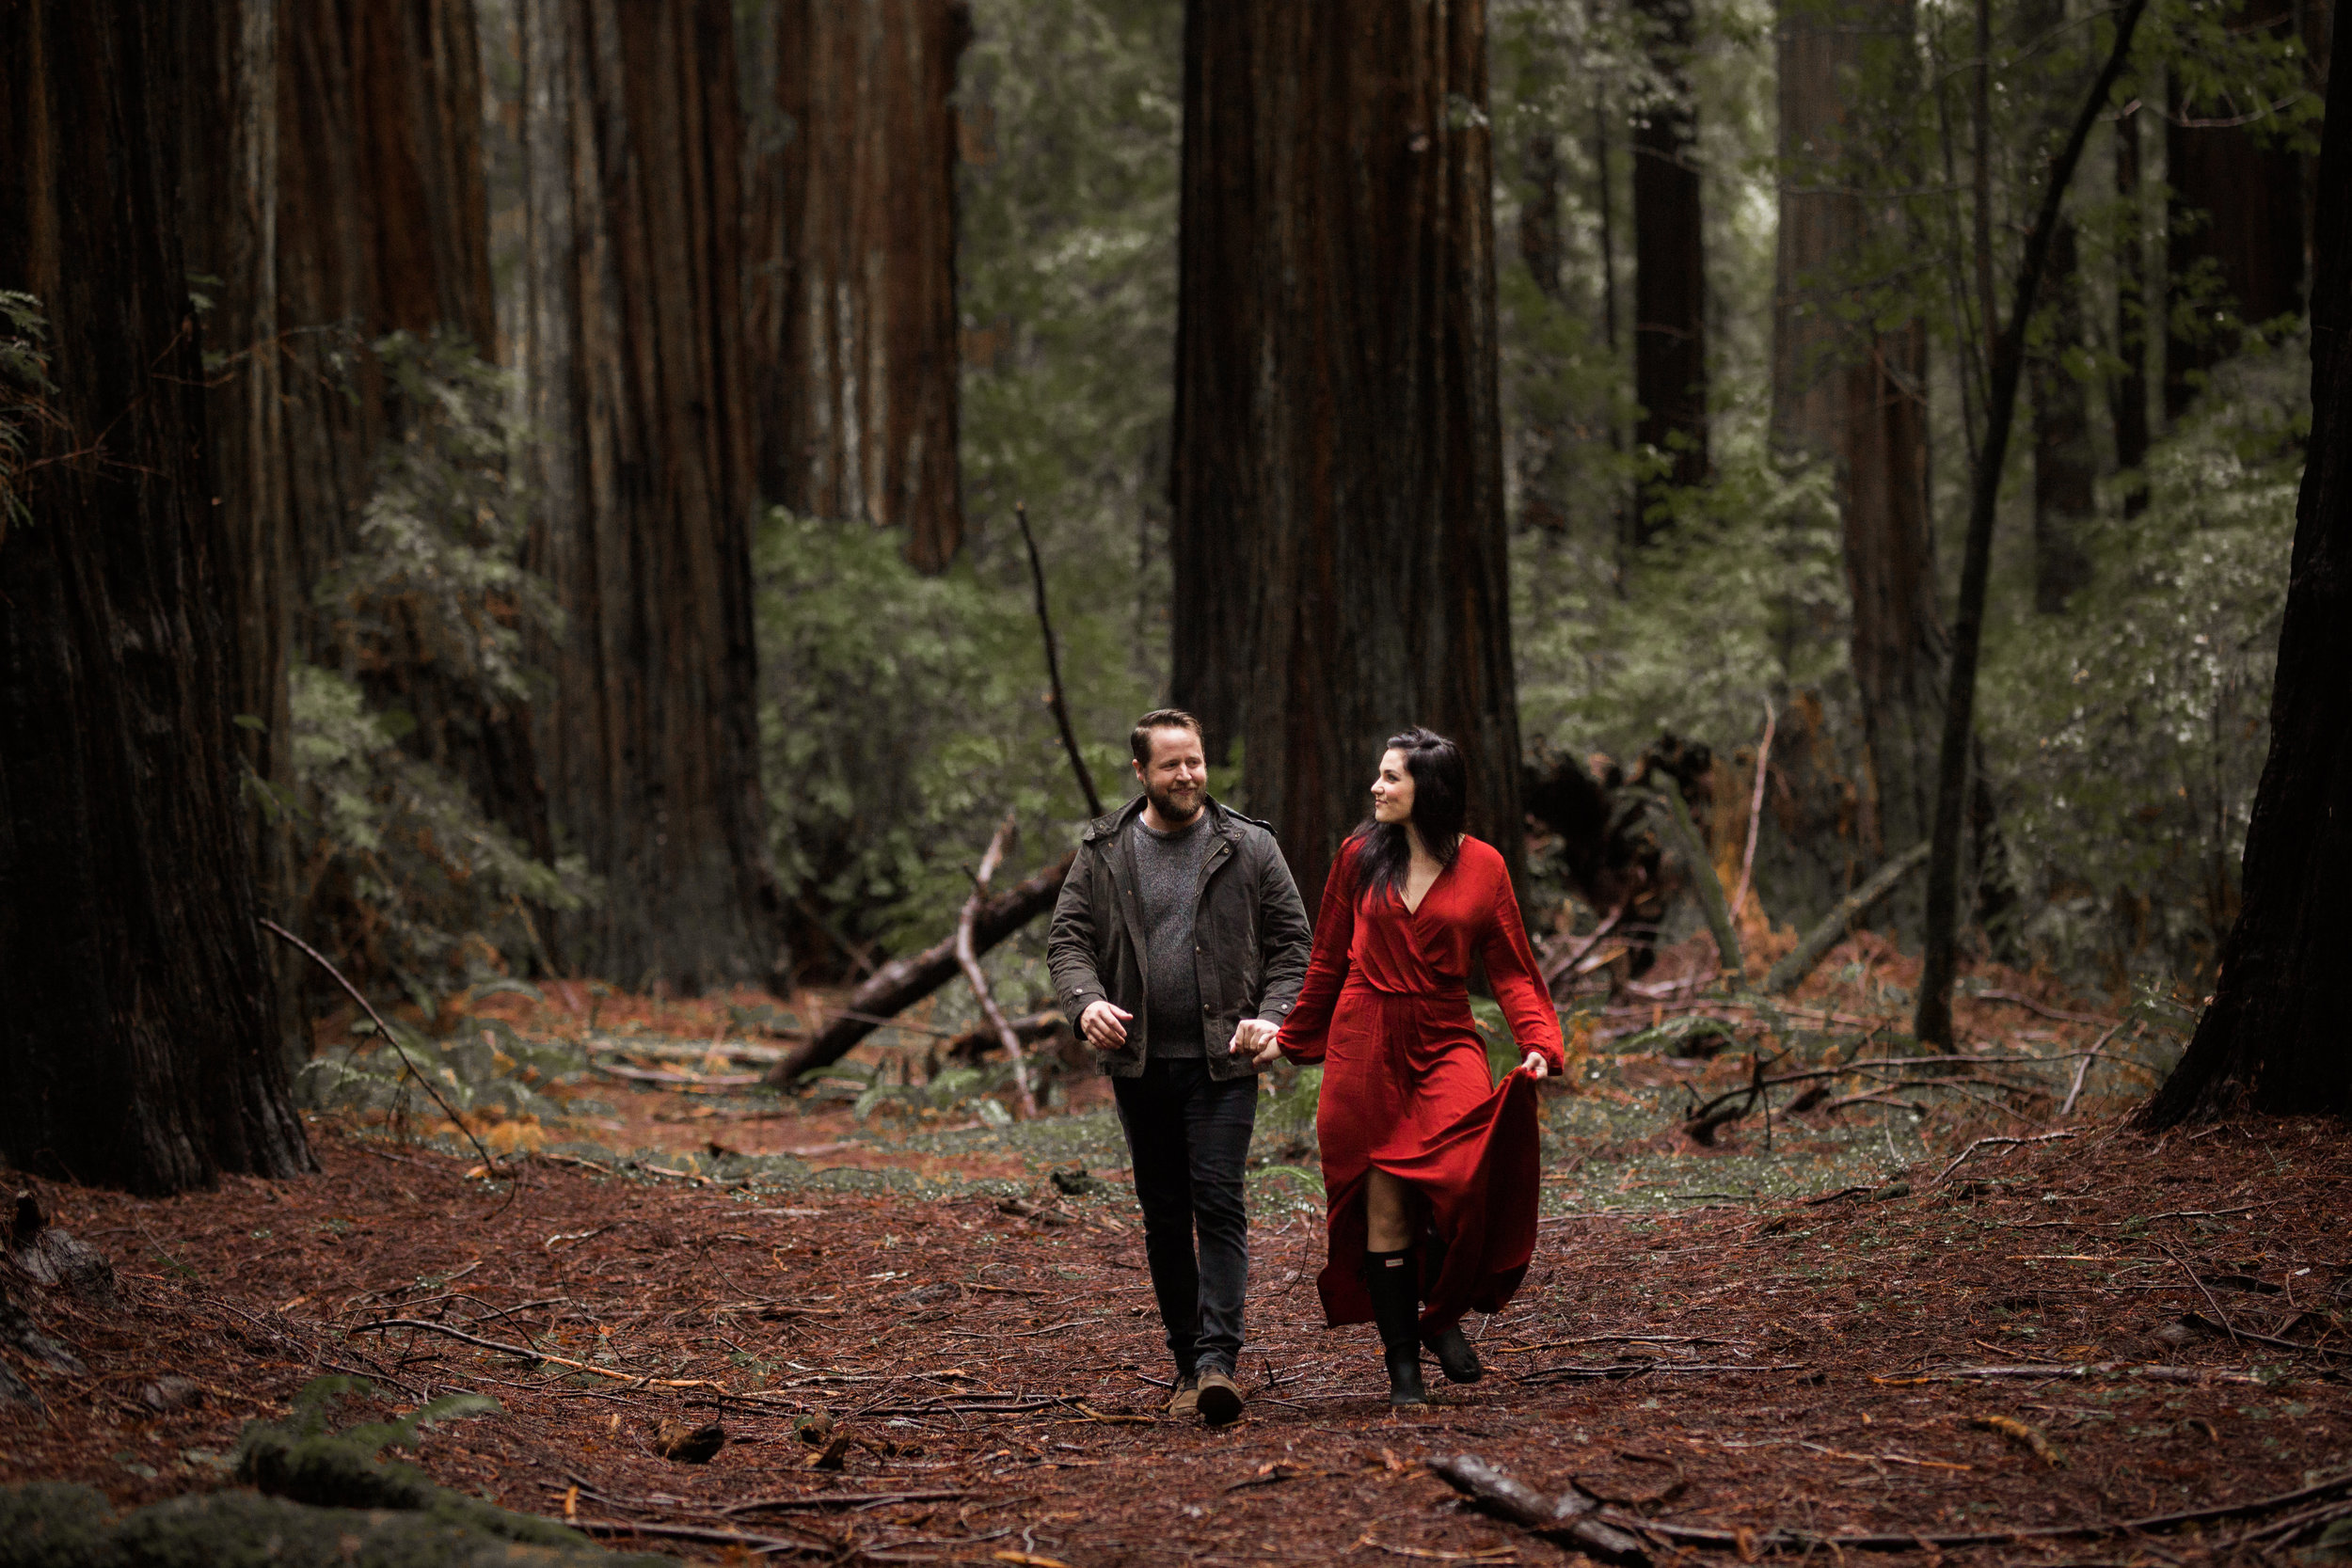 nicole-daacke-photography-redwoods-national-park-forest-rainy-foggy-adventure-engagement-session-humboldt-county-old-growth-redwood-tree-elopement-intimate-wedding-photographer-32.jpg